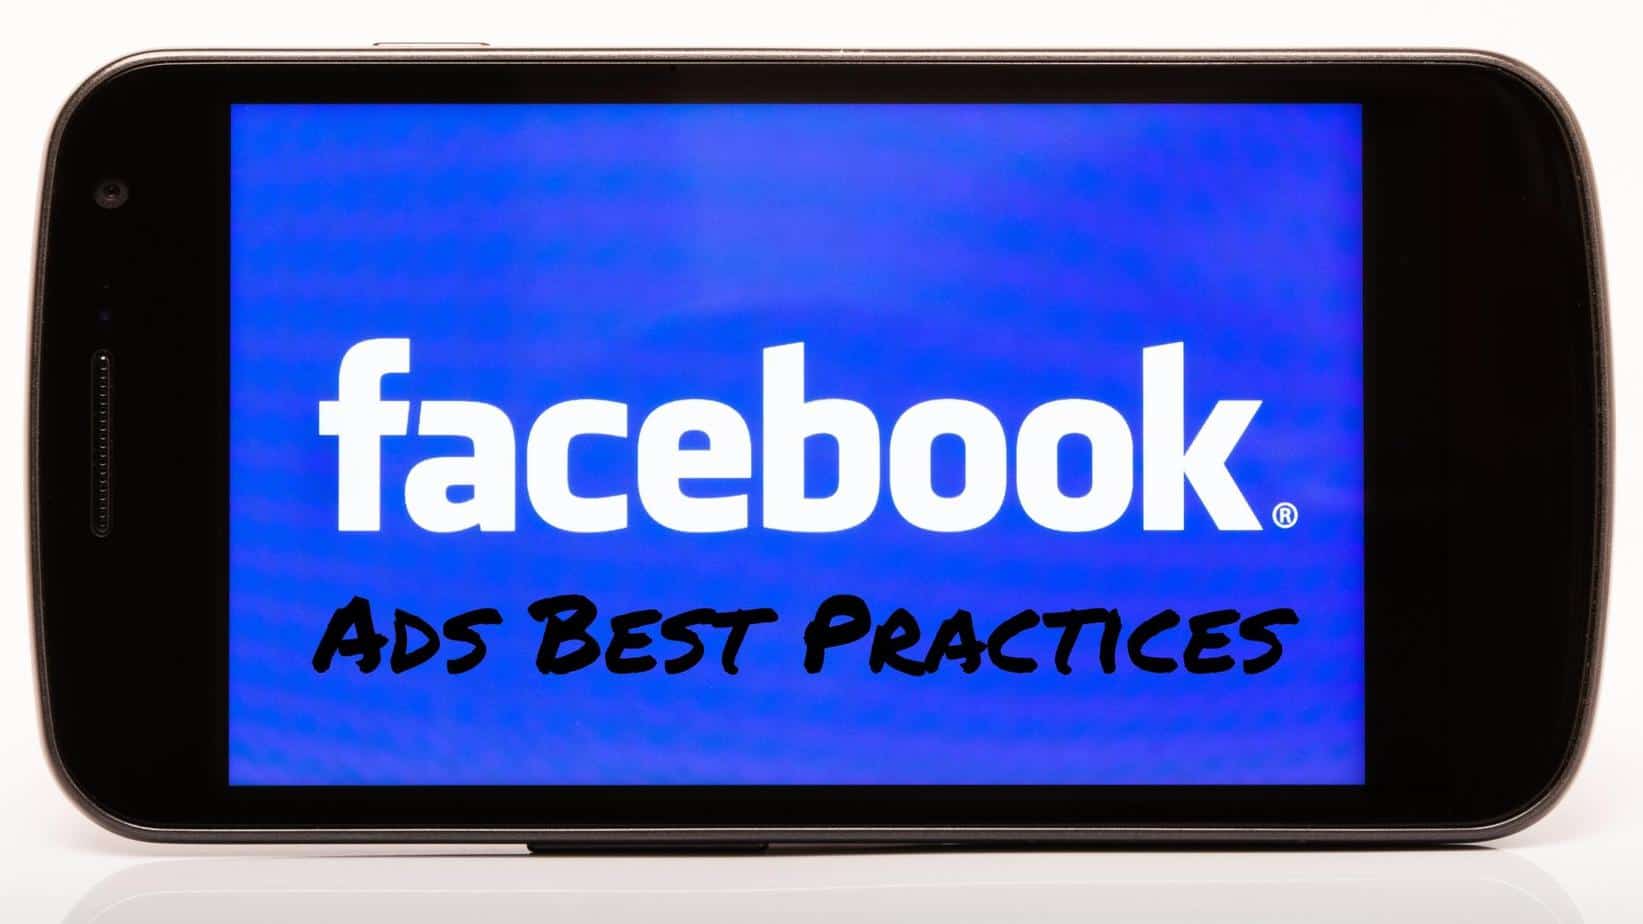 Featured image for “Facebook Ads Best Practices”